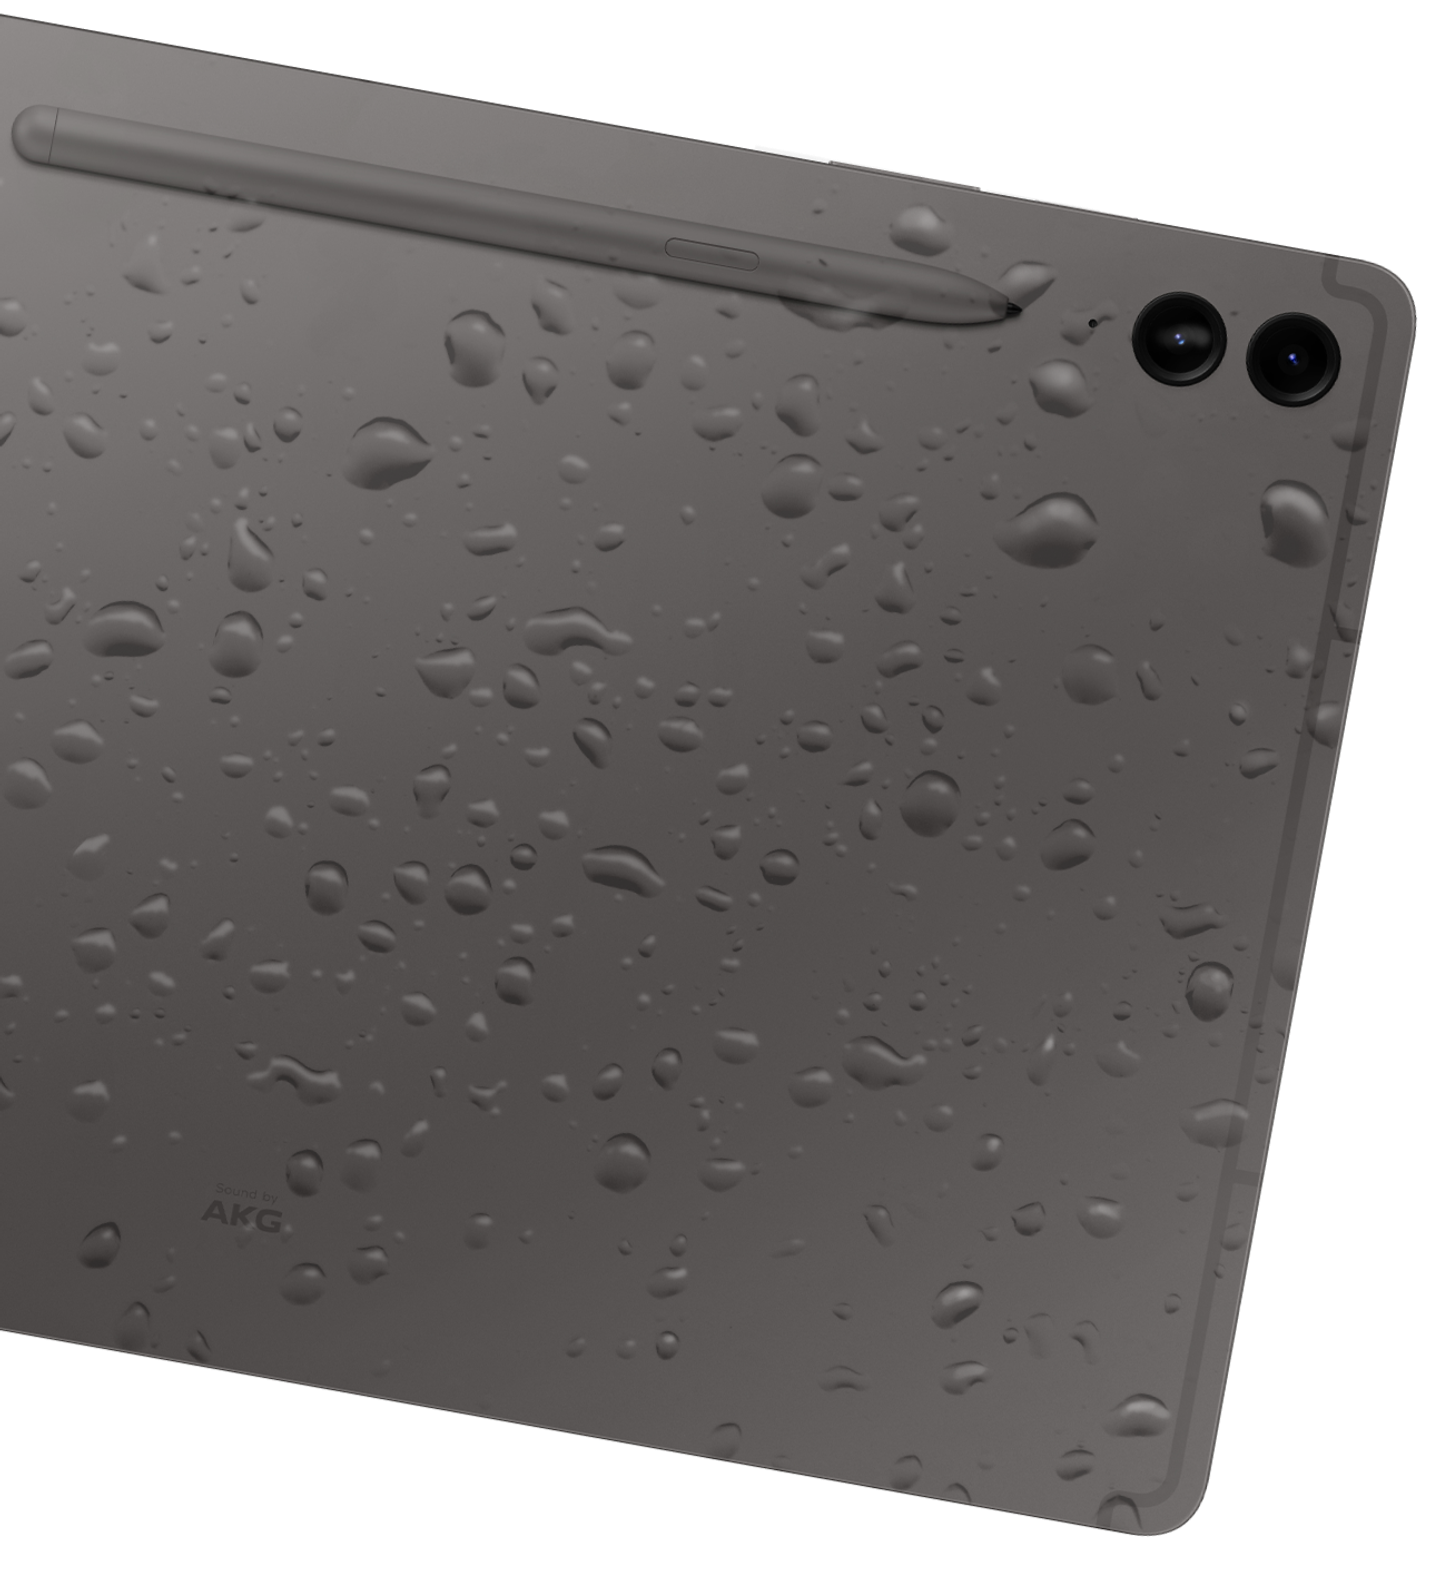 The back of Galaxy tablet covered in water droplets.